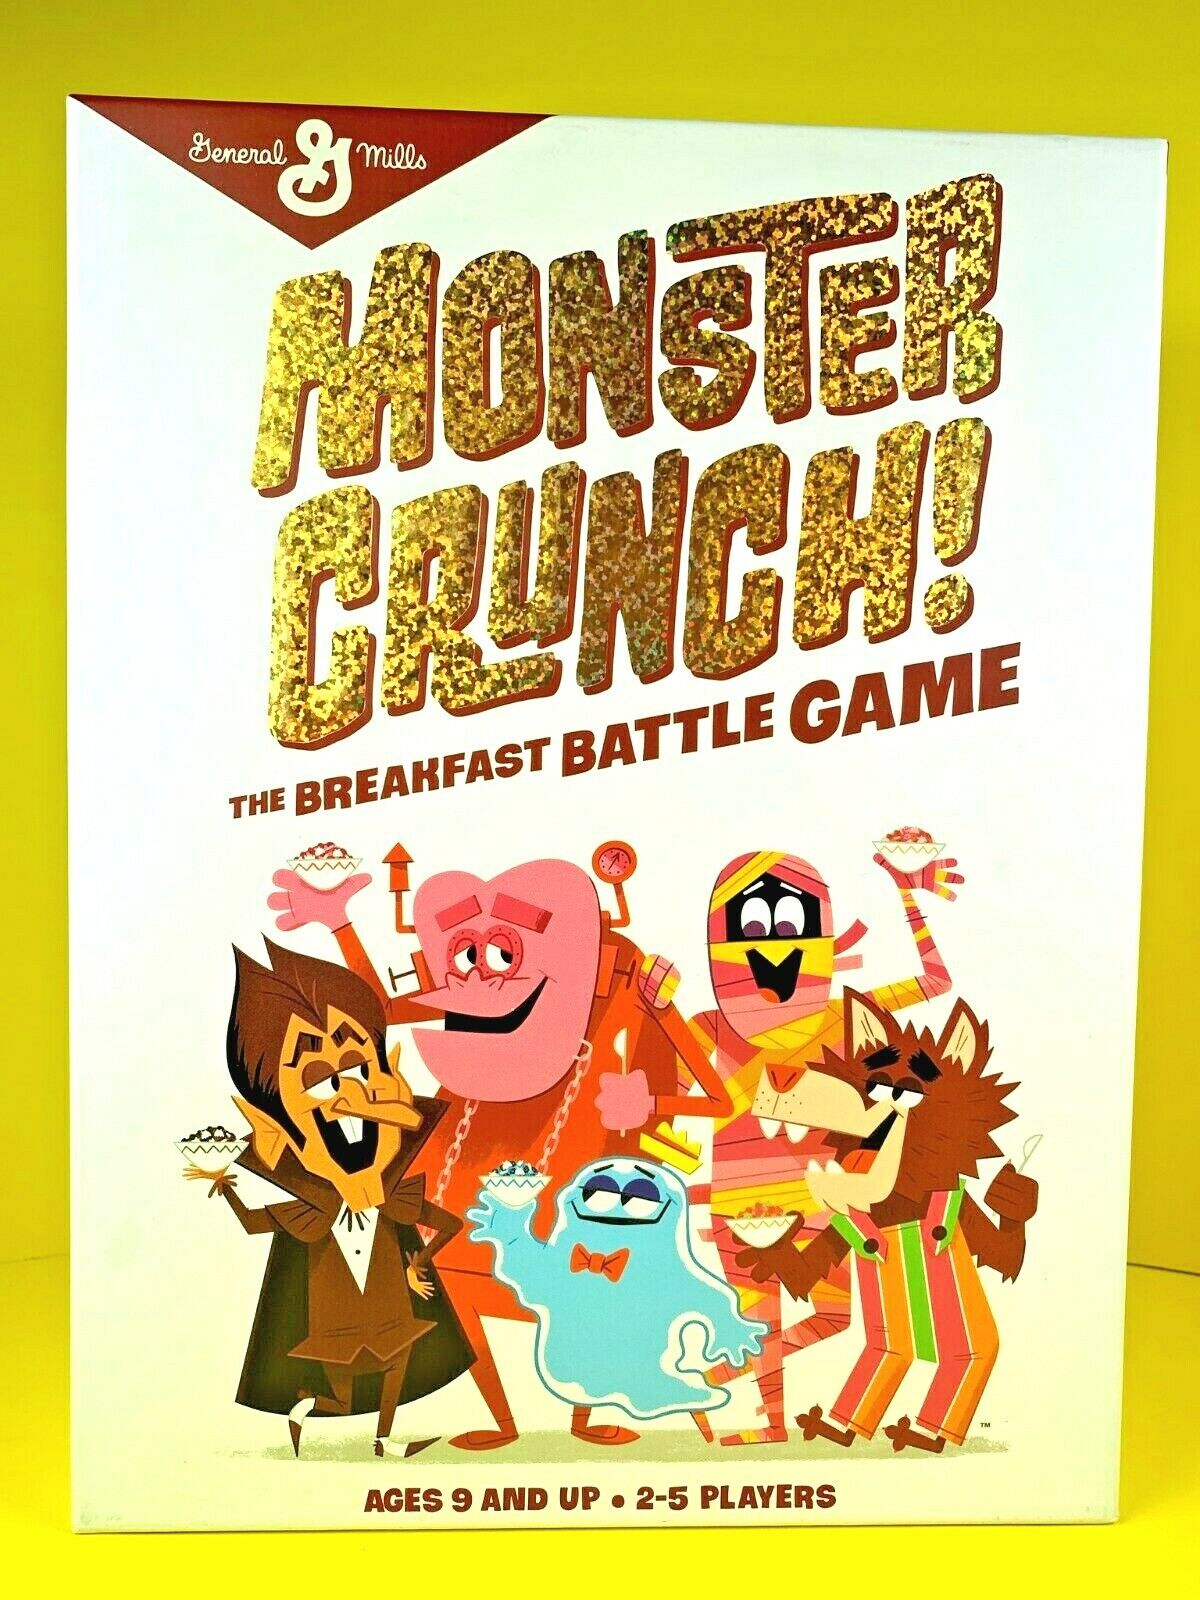 Monster Crunch (Board Game, 2018) Big G Creative General Mills Cereal New